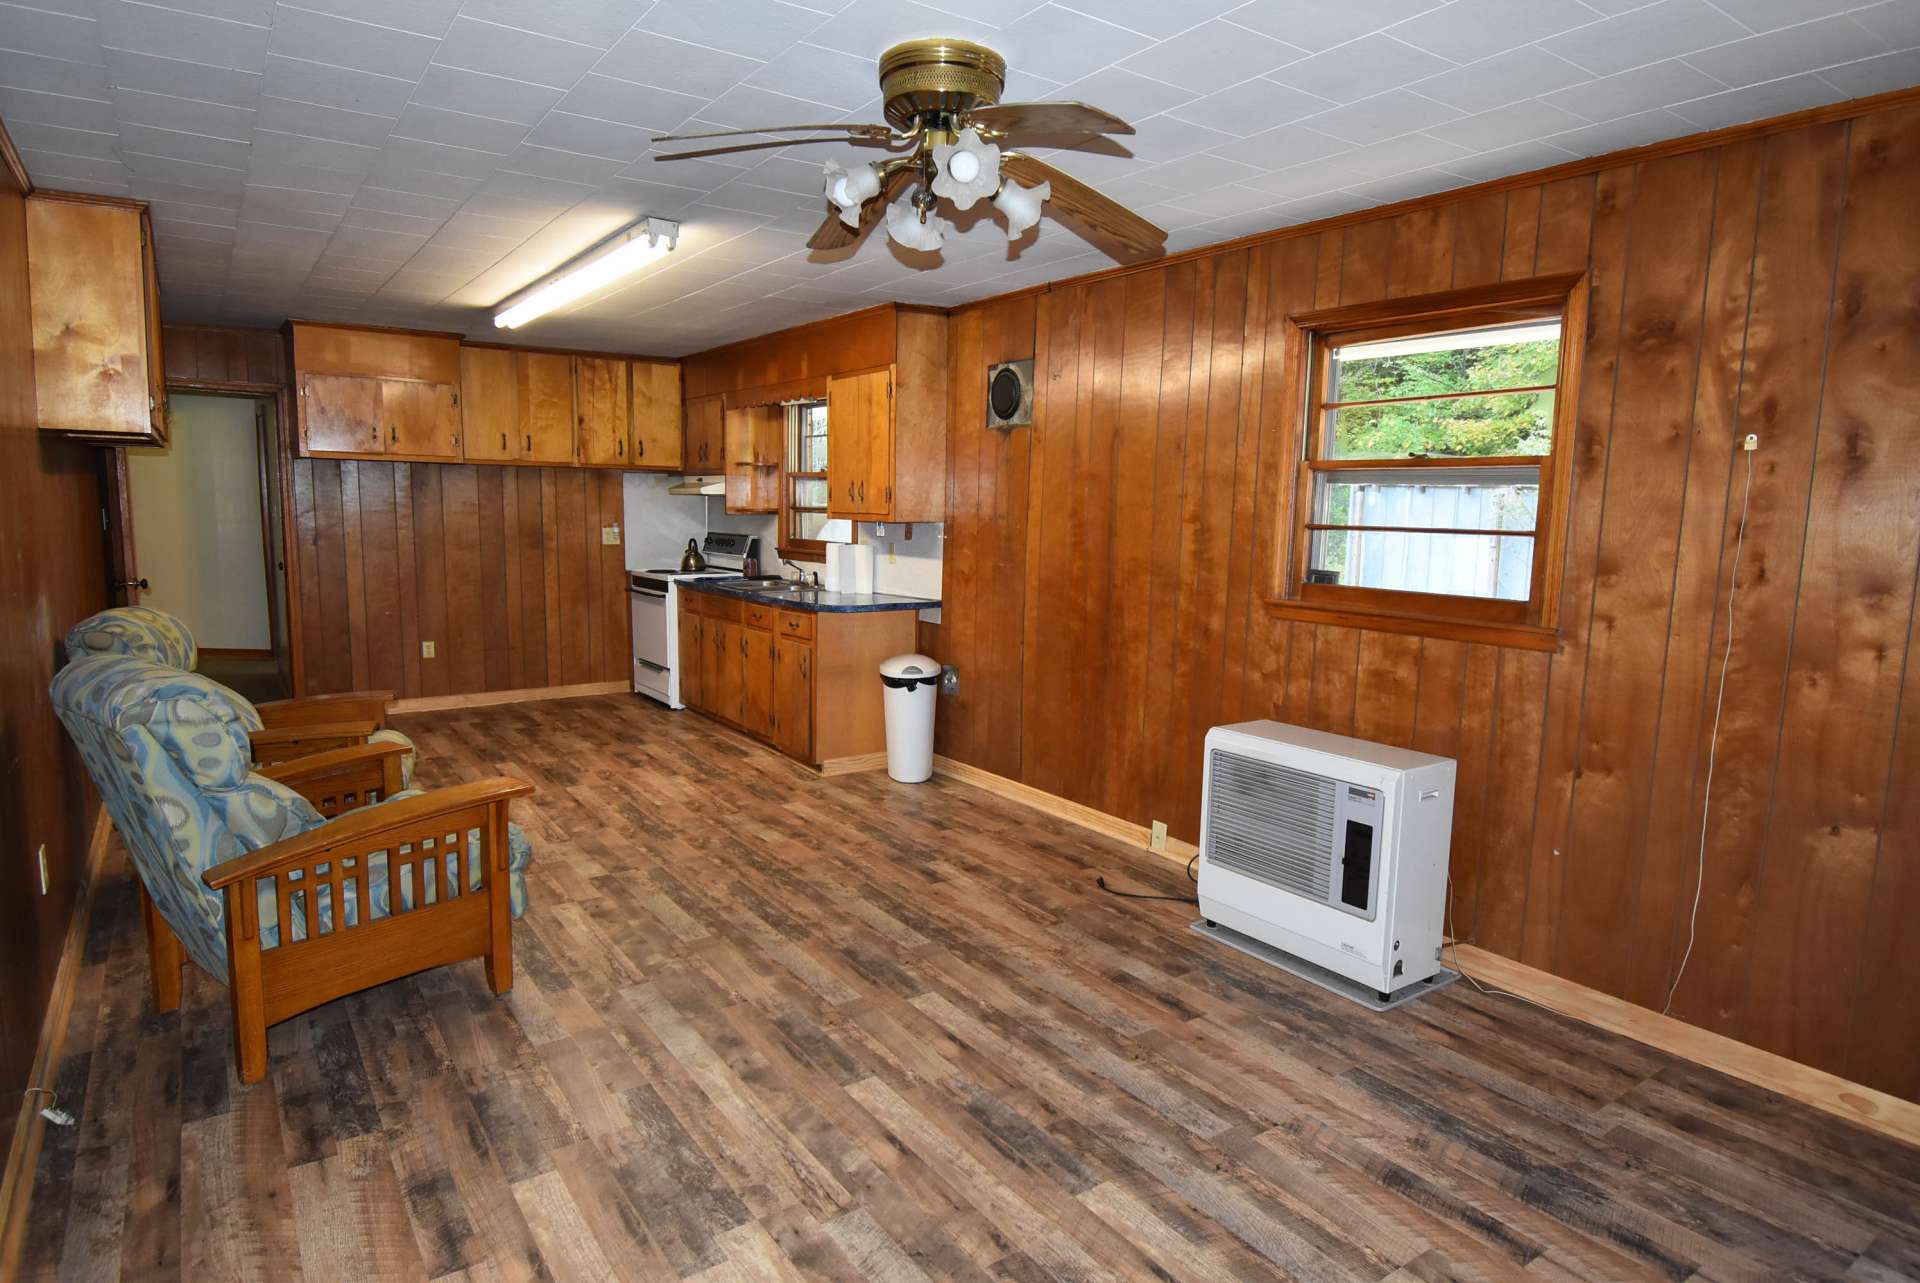 A large eat-in kitchen offers plenty of work and storage space.  Notice the new flooring  and there is also a flue, should you want to add a wood stove for added warmth.